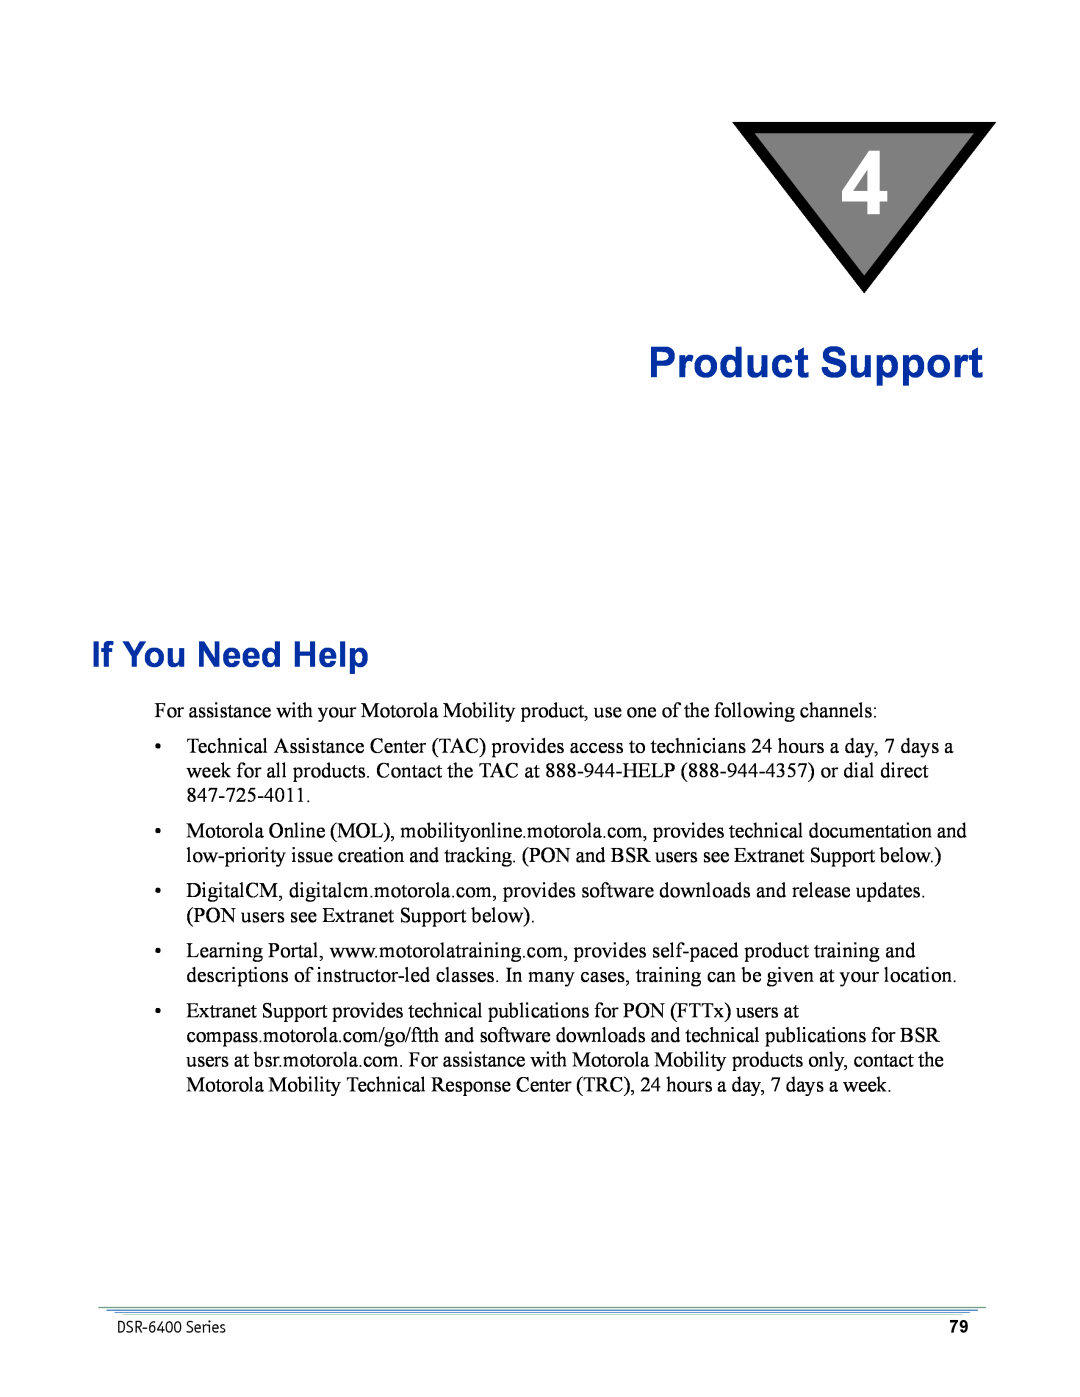 Motorola DSR-6400 manual Product Support, If You Need Help 